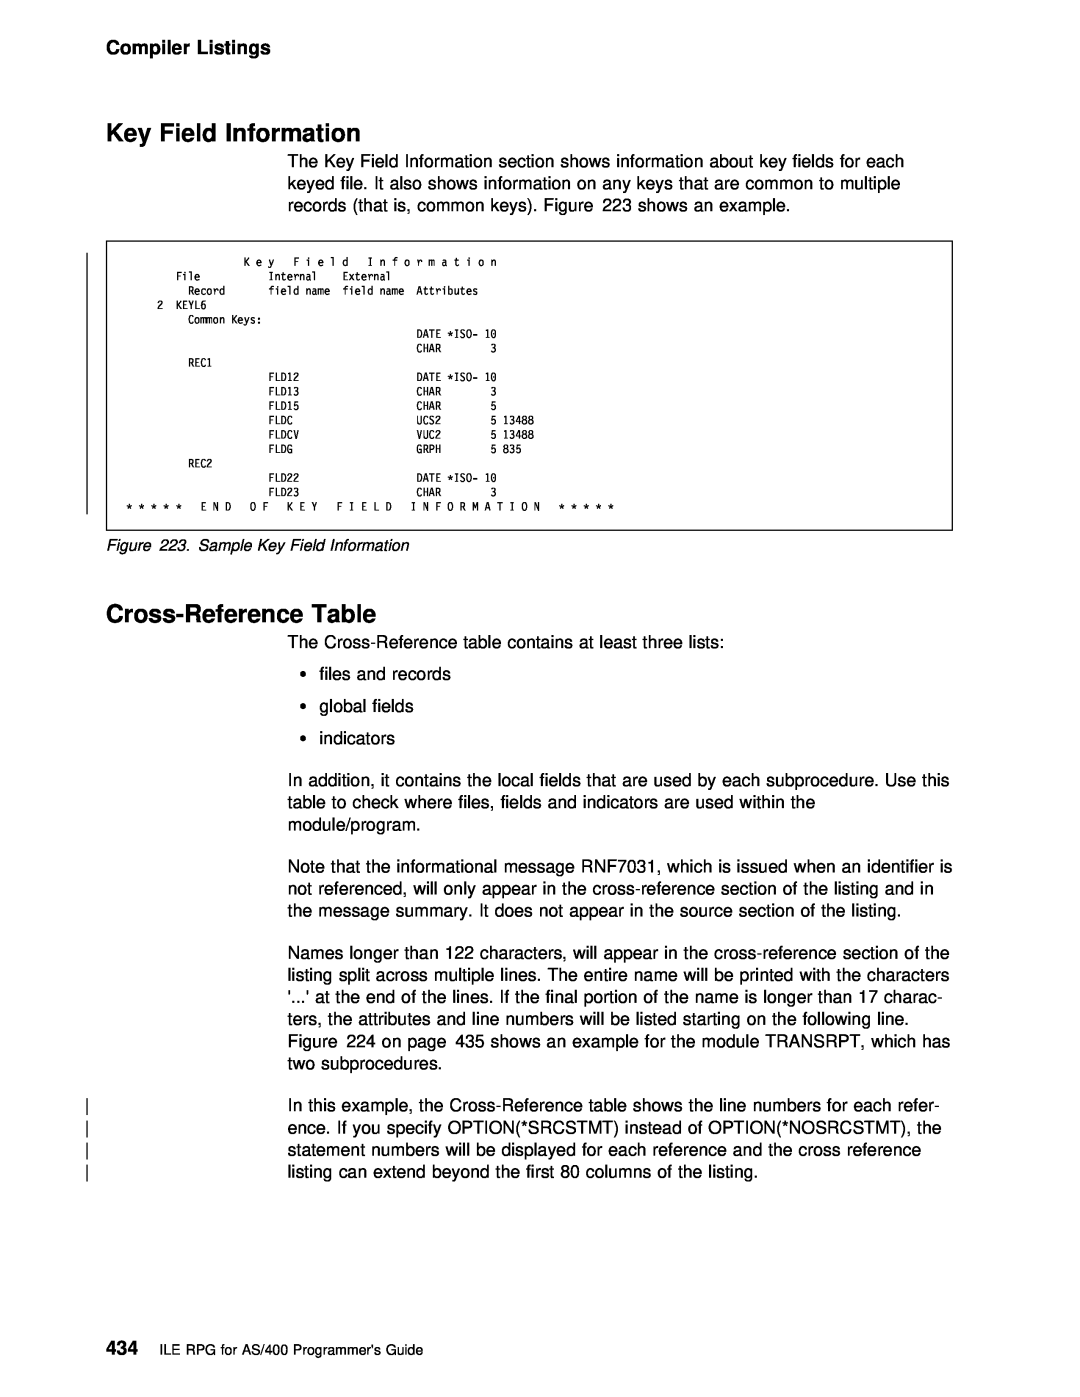 IBM AS/400 manual Cross-Reference Table, Compiler Listings, Sample Key Field Information 